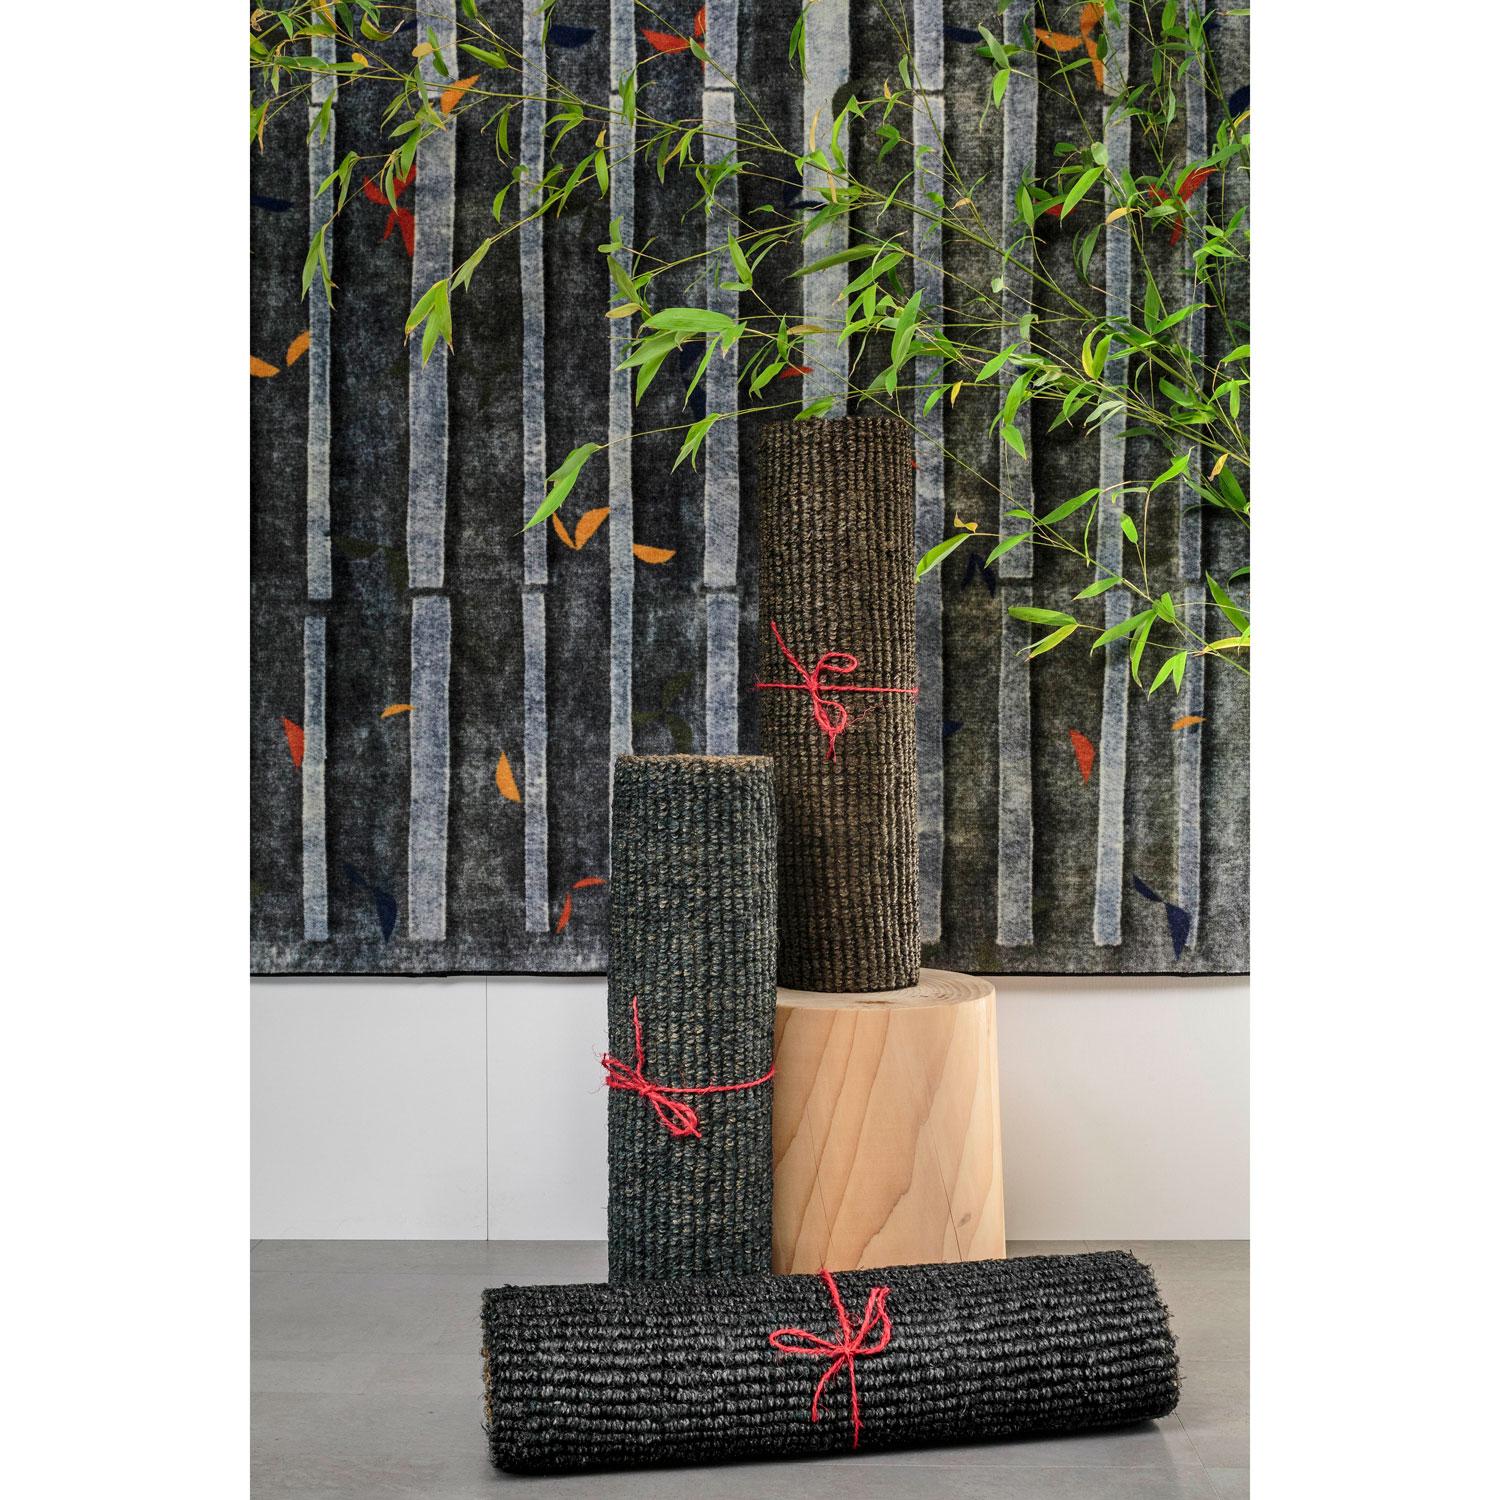 Contemporary 21st Cent Outdoor-Indoor Natural Black Coconut Rug by Deanna Comellini 195x285cm For Sale